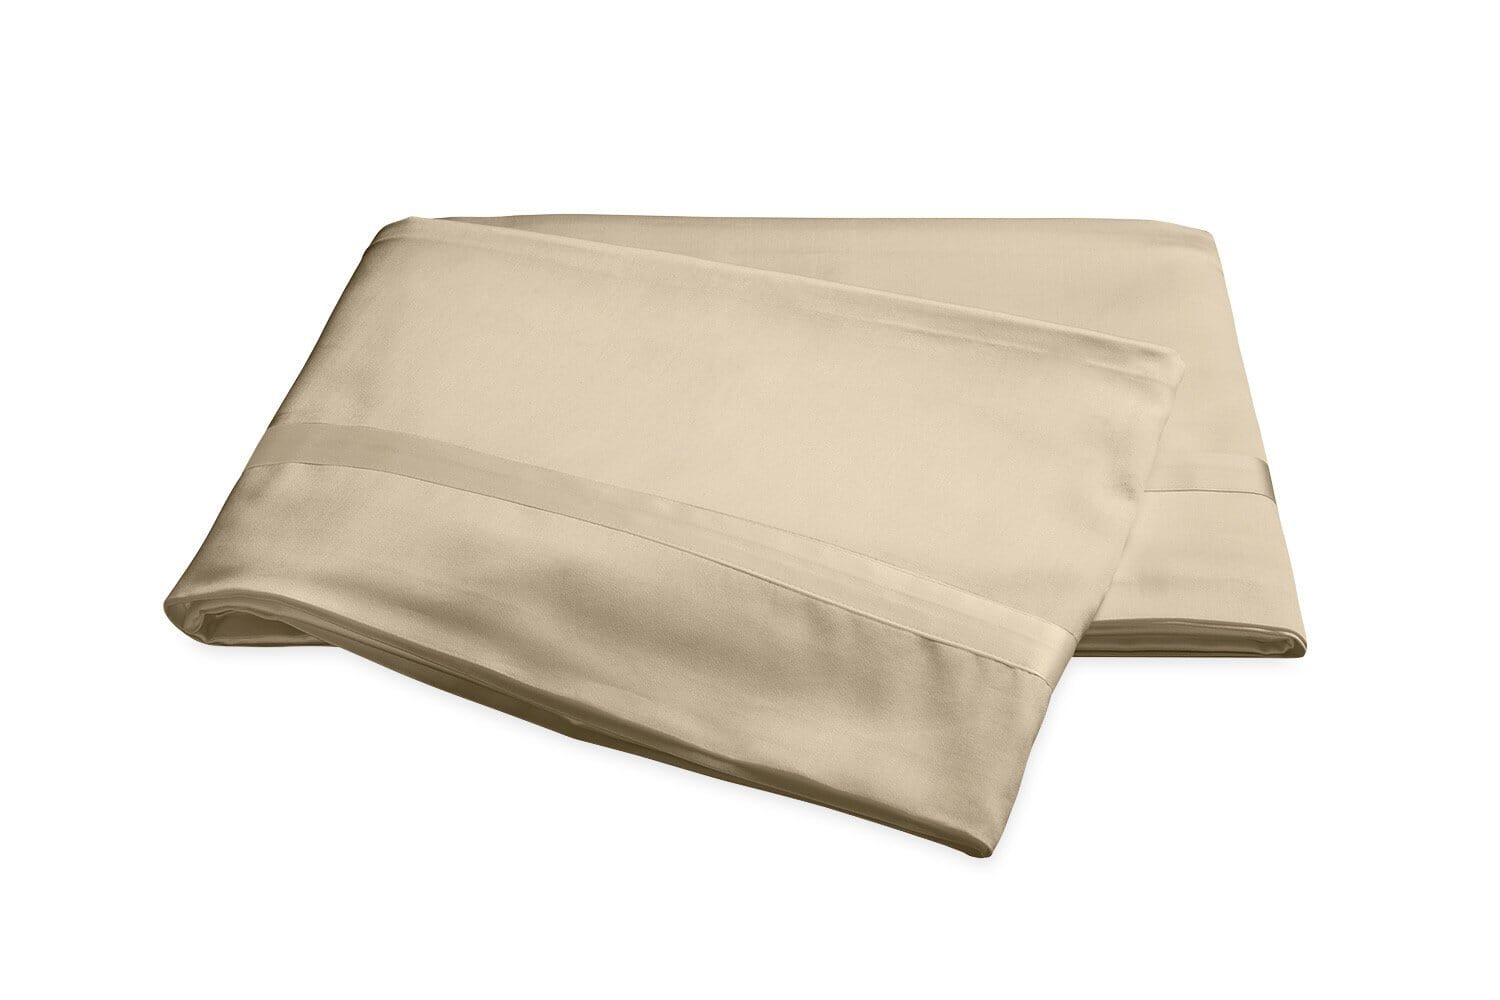 Matouk King Flat Sheet - Nocturne Sateen Champagne Bedding at Fig Linens and Home